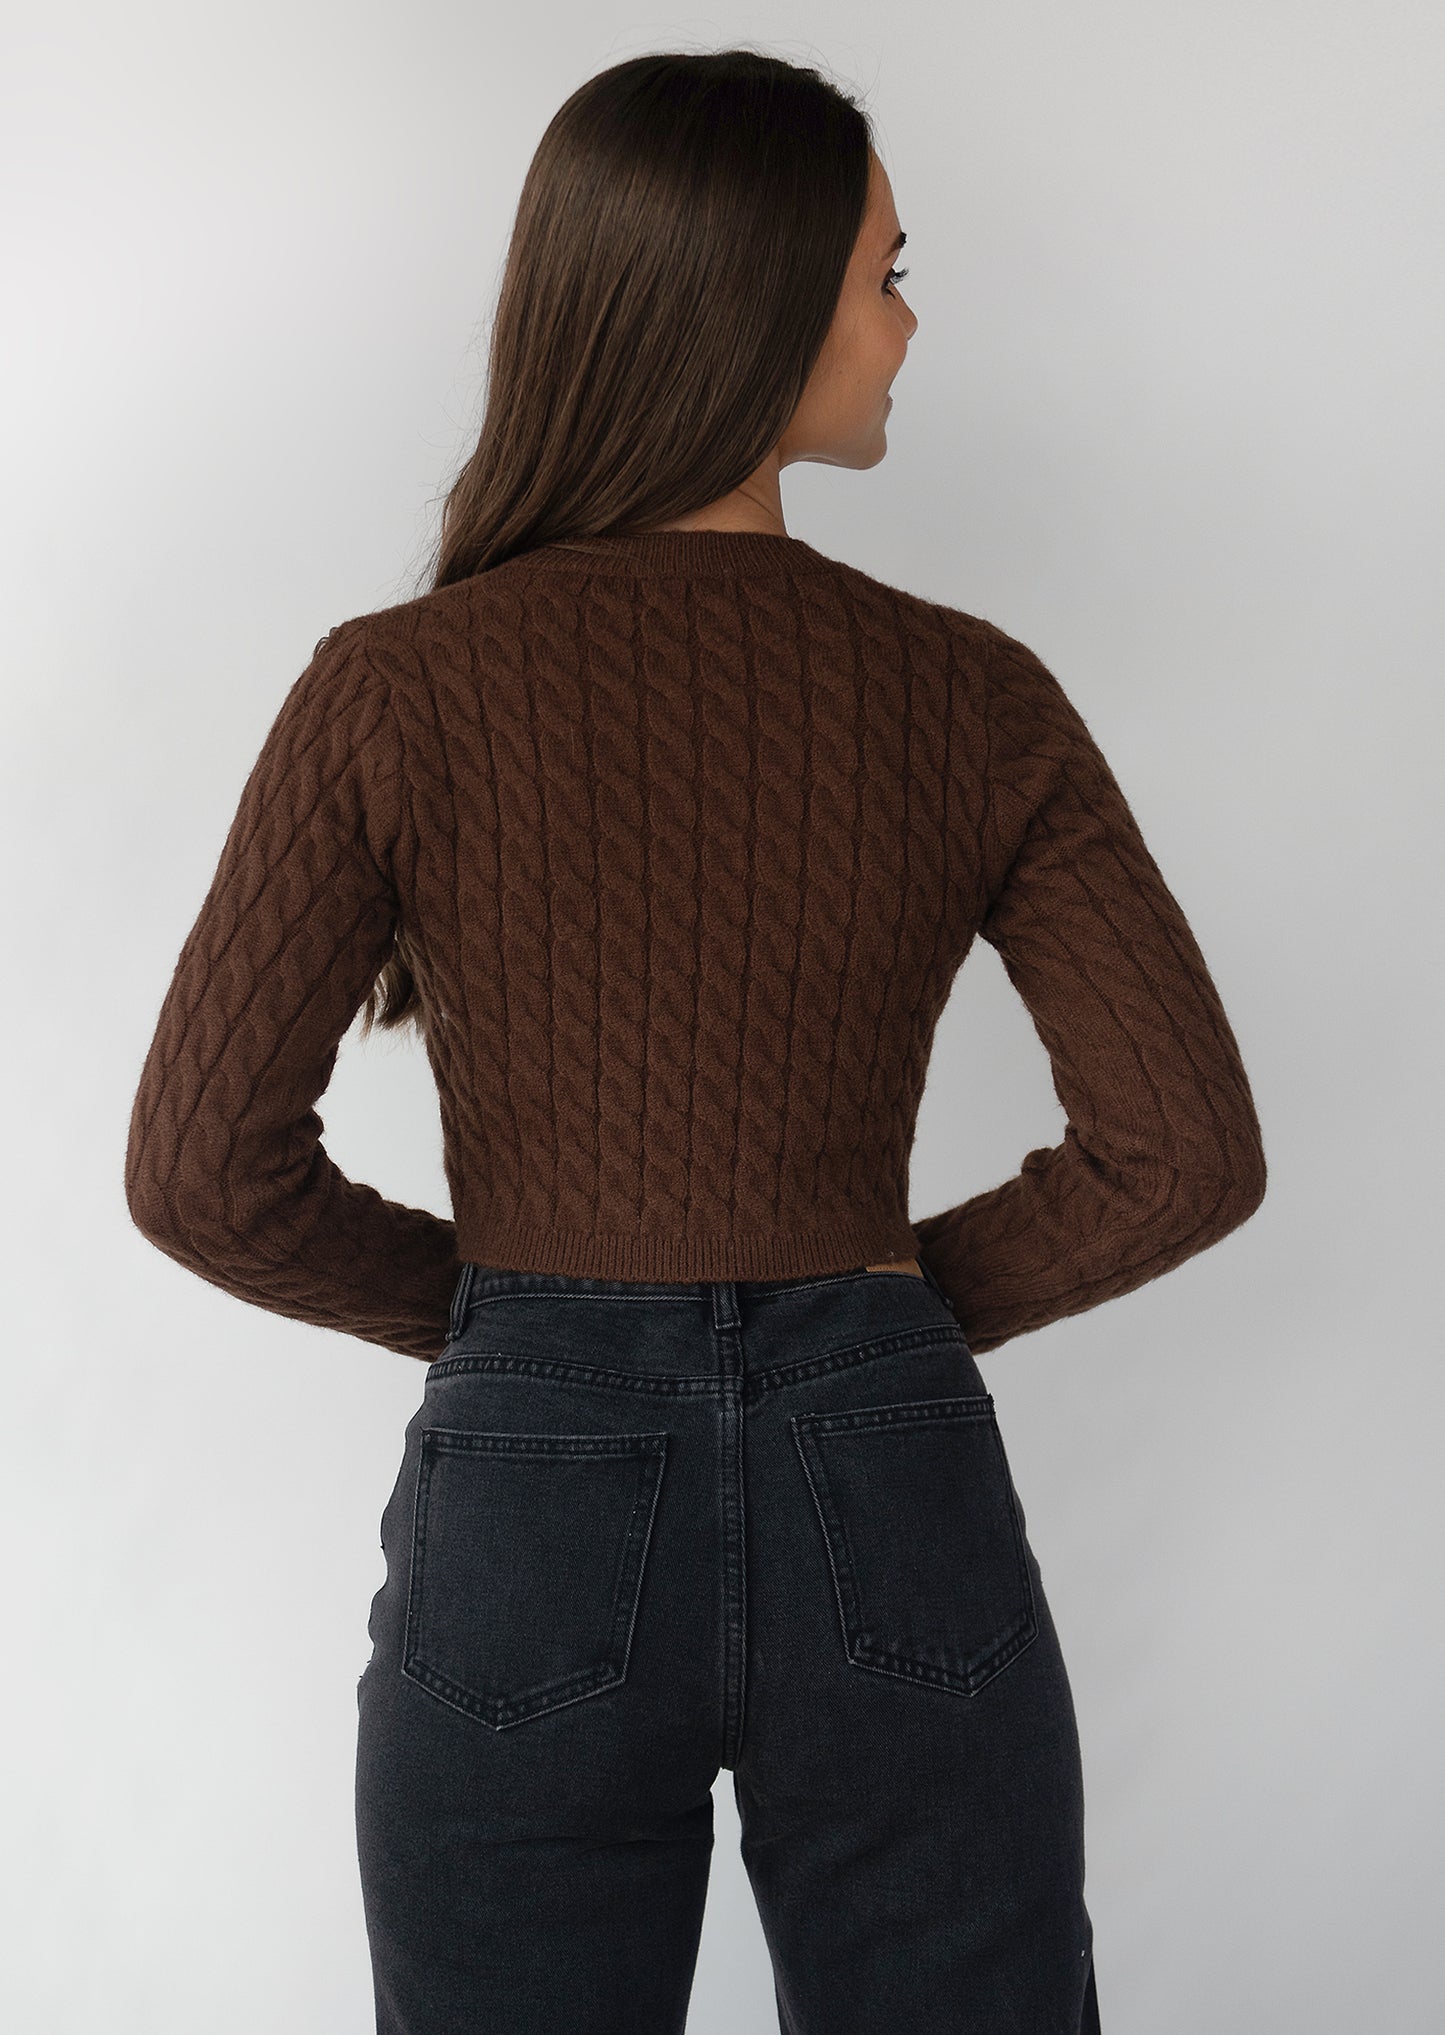 Cable knit cardigan in brown